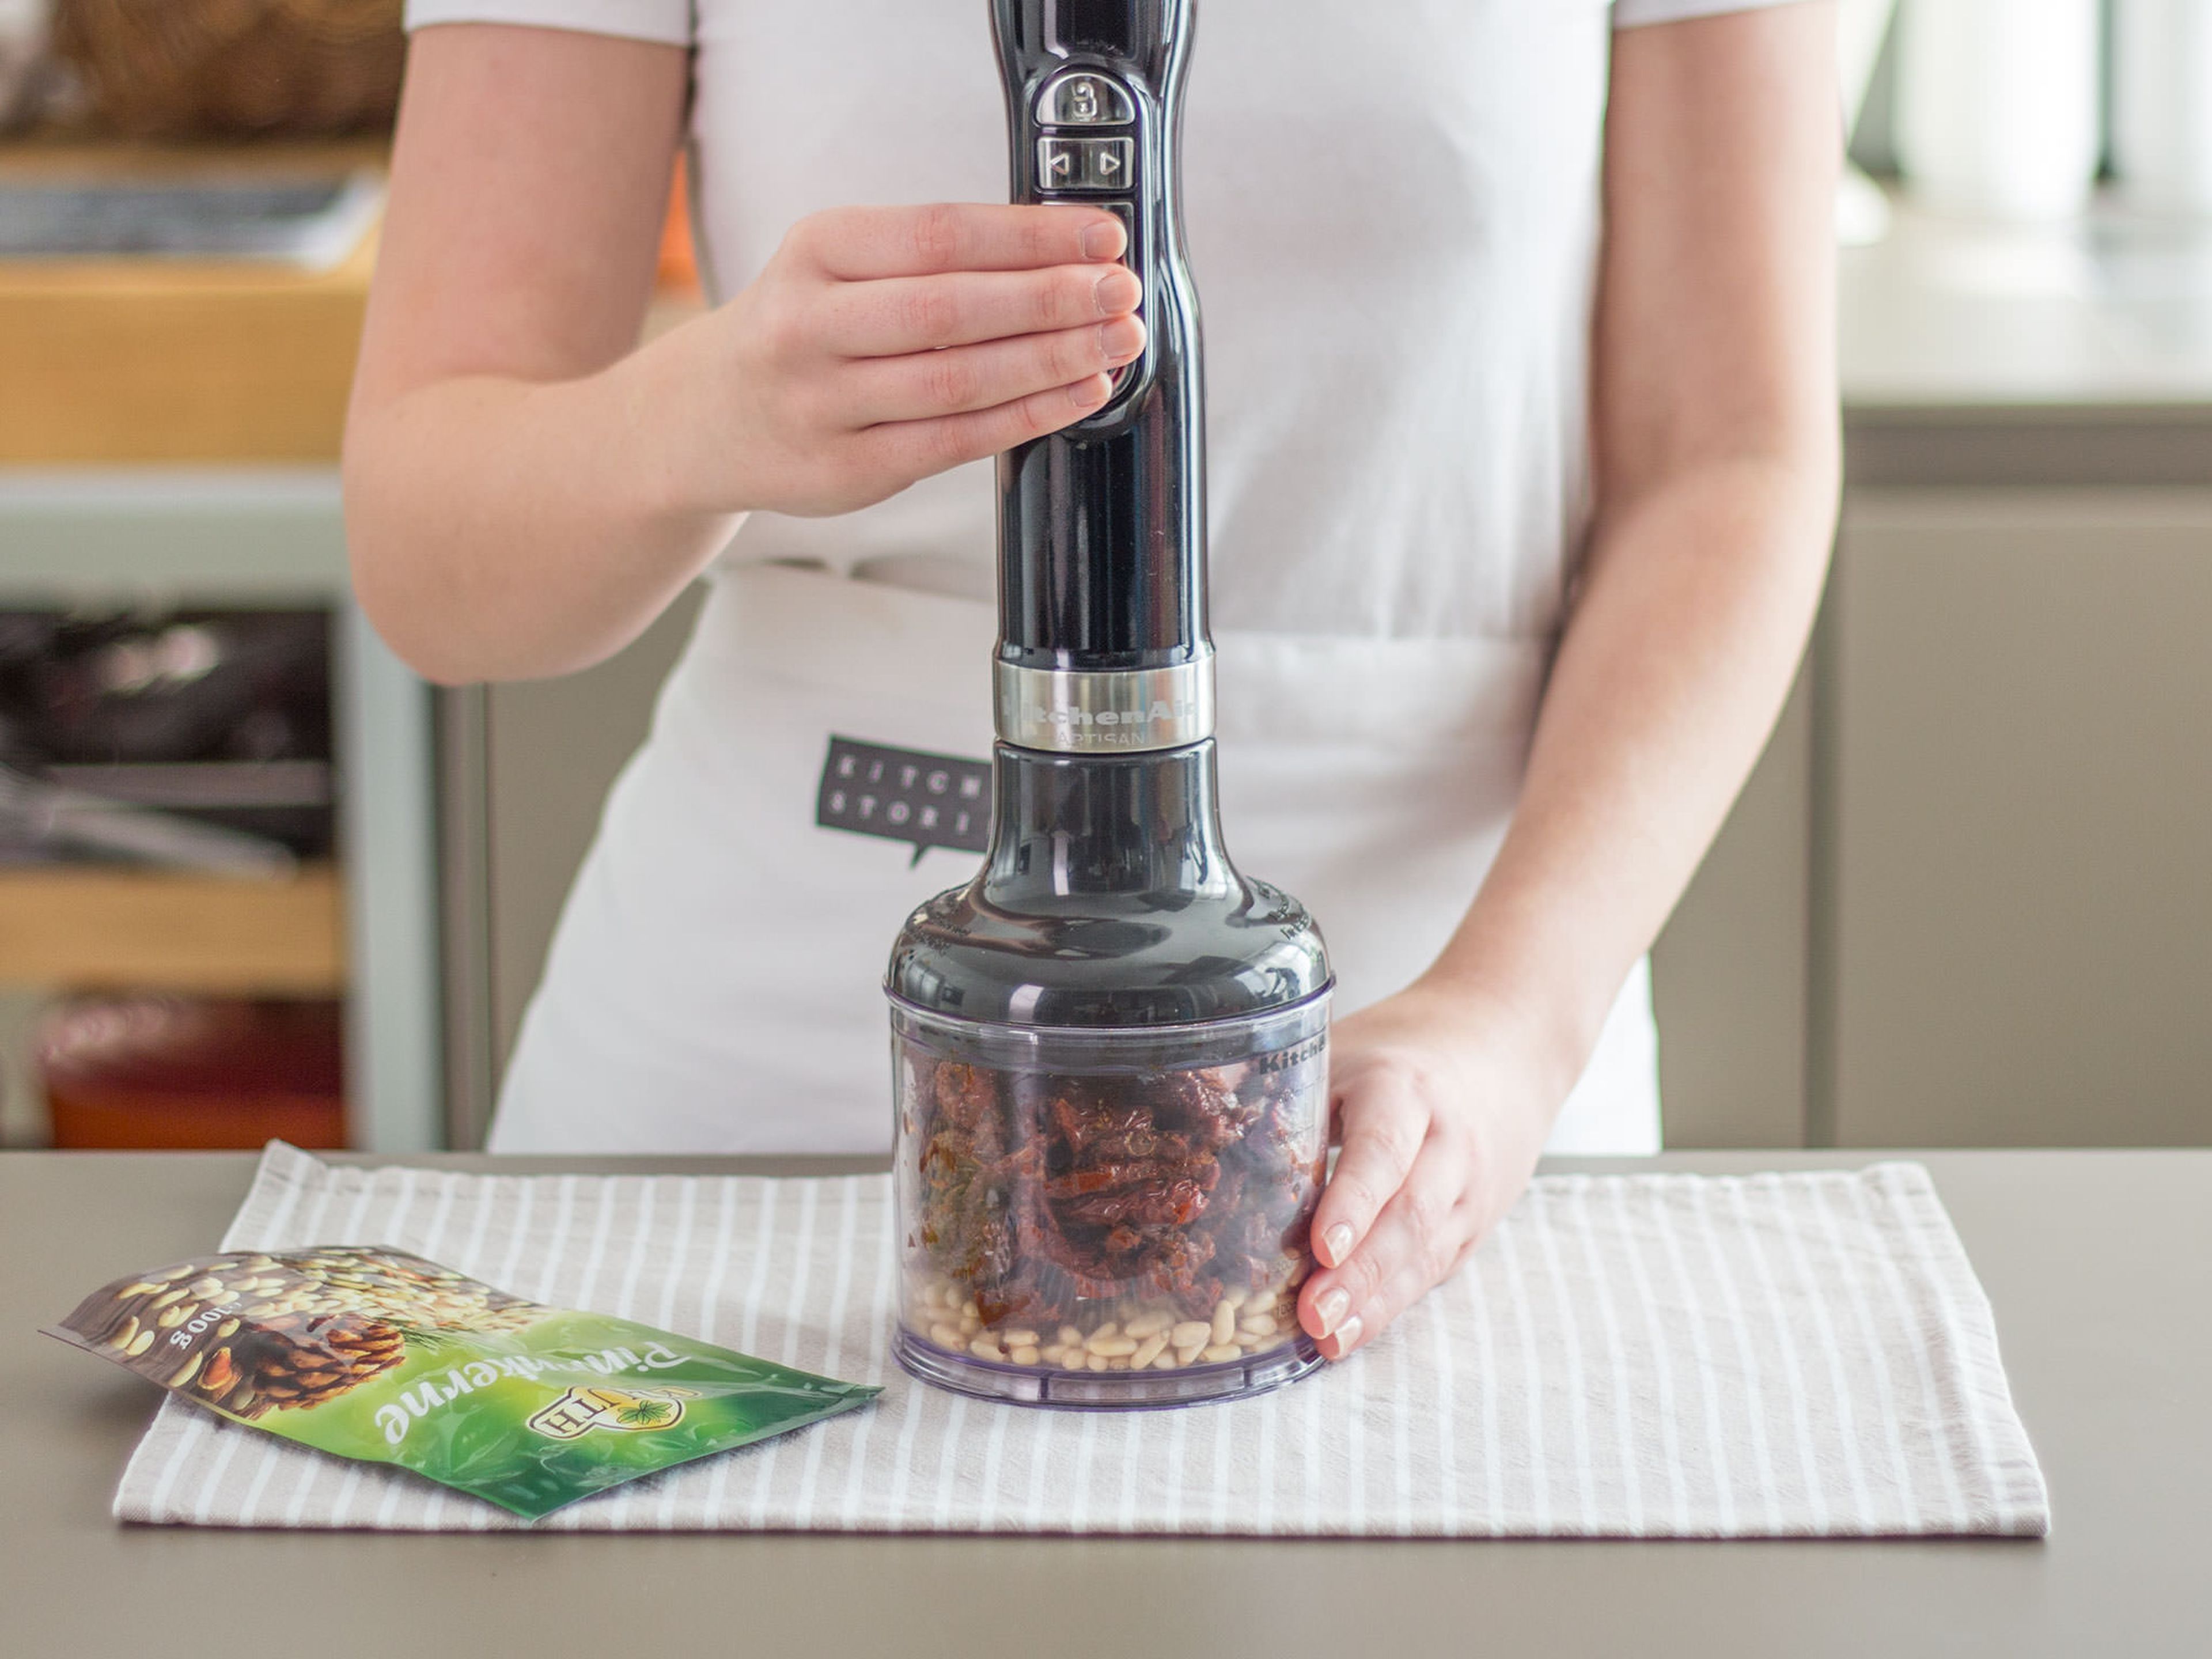 In a food processor, pulse sun-dried tomatoes and pine nuts into a smooth paste. Season to taste with salt and pepper.